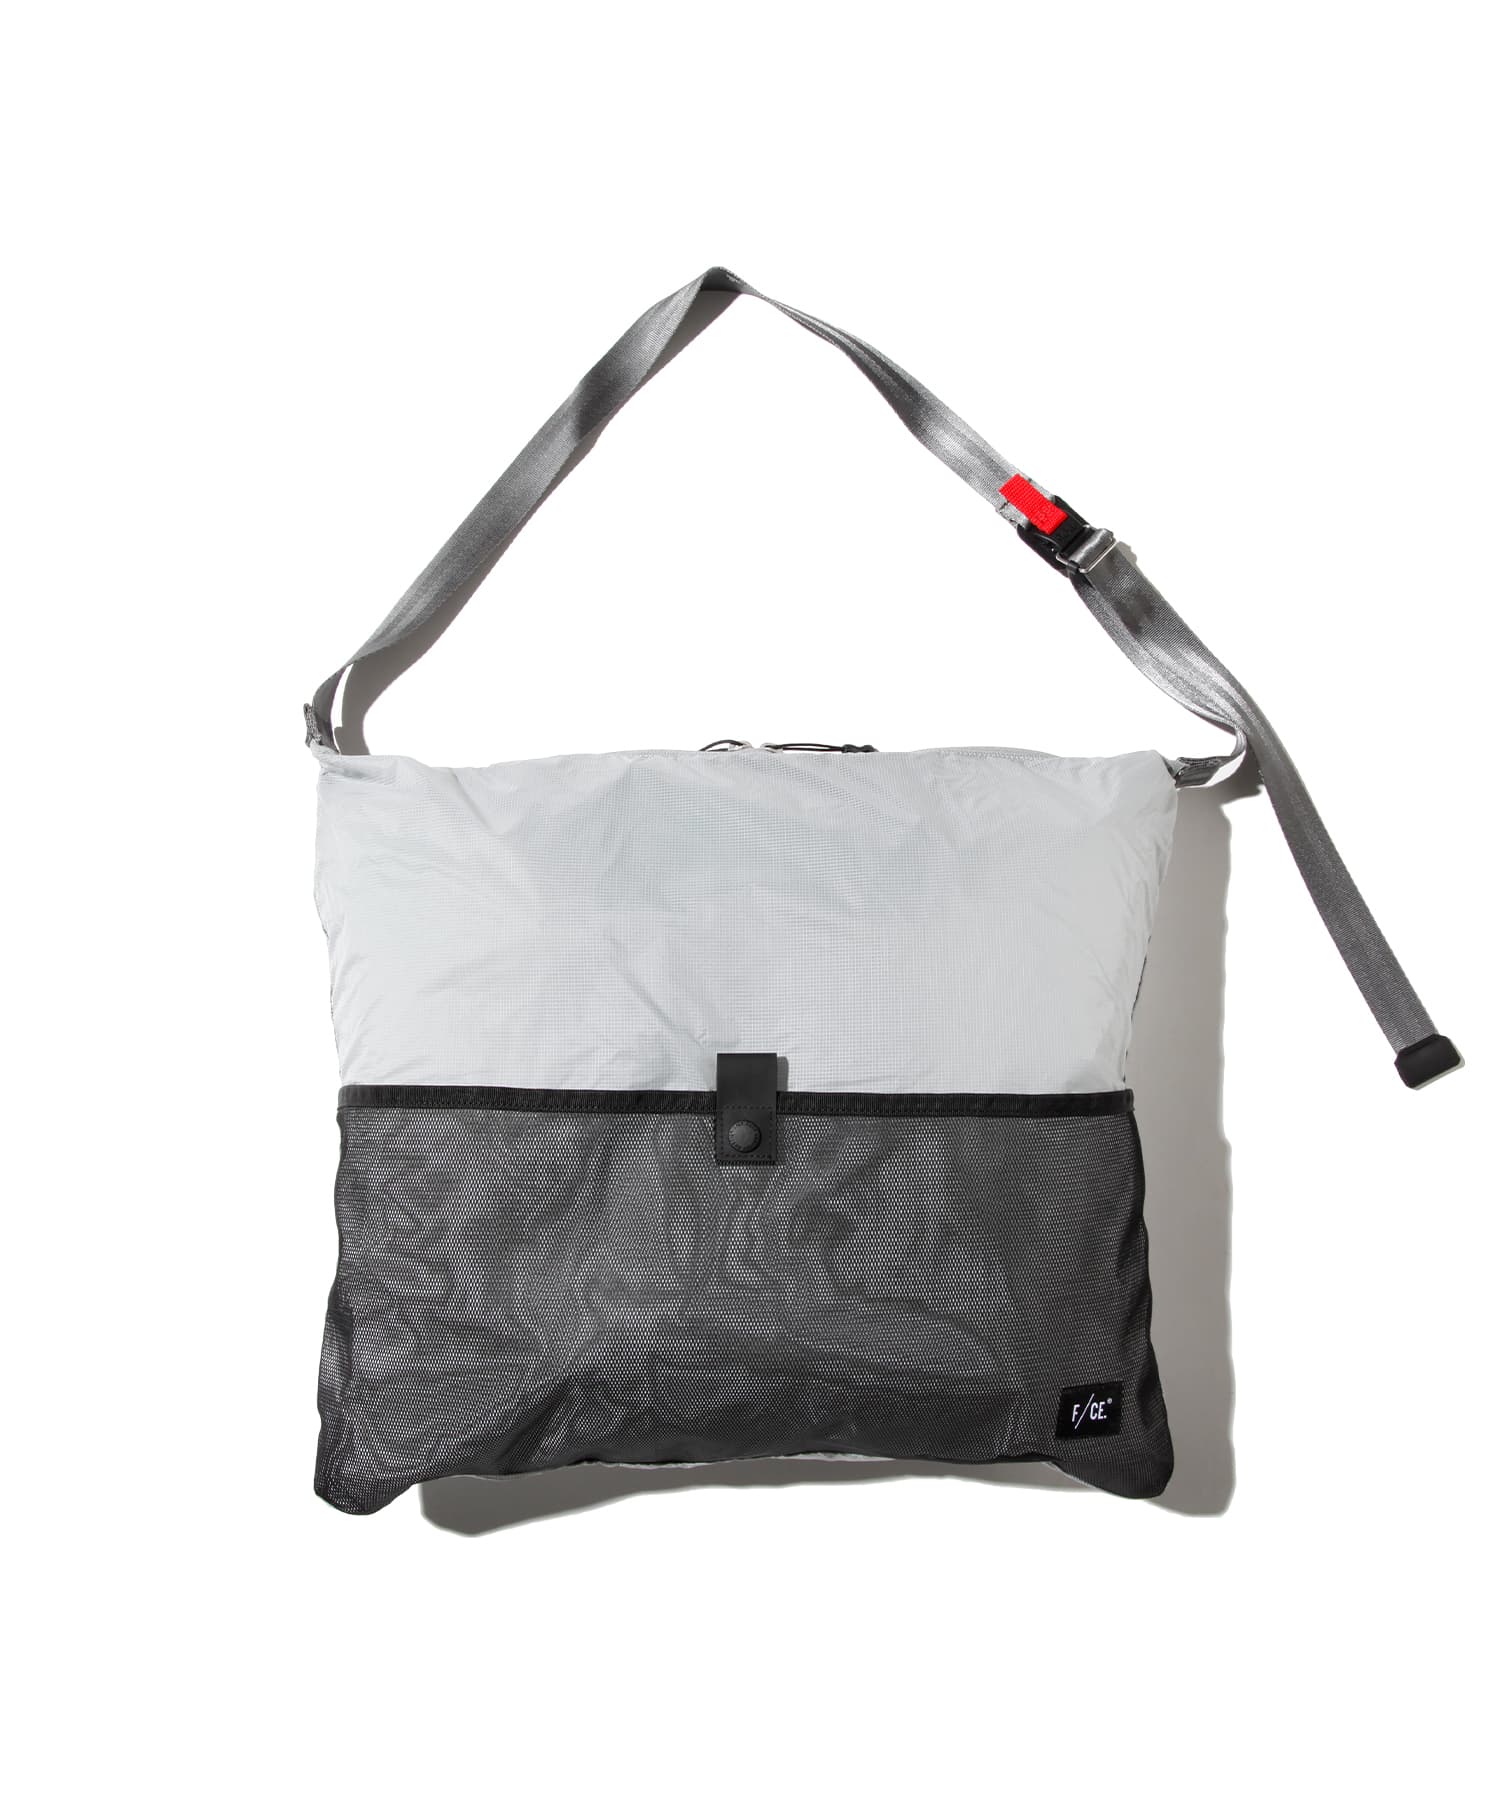 【F/CE】RECYCLE PACKABLE ONE SHOULDER 再生便攜單肩包